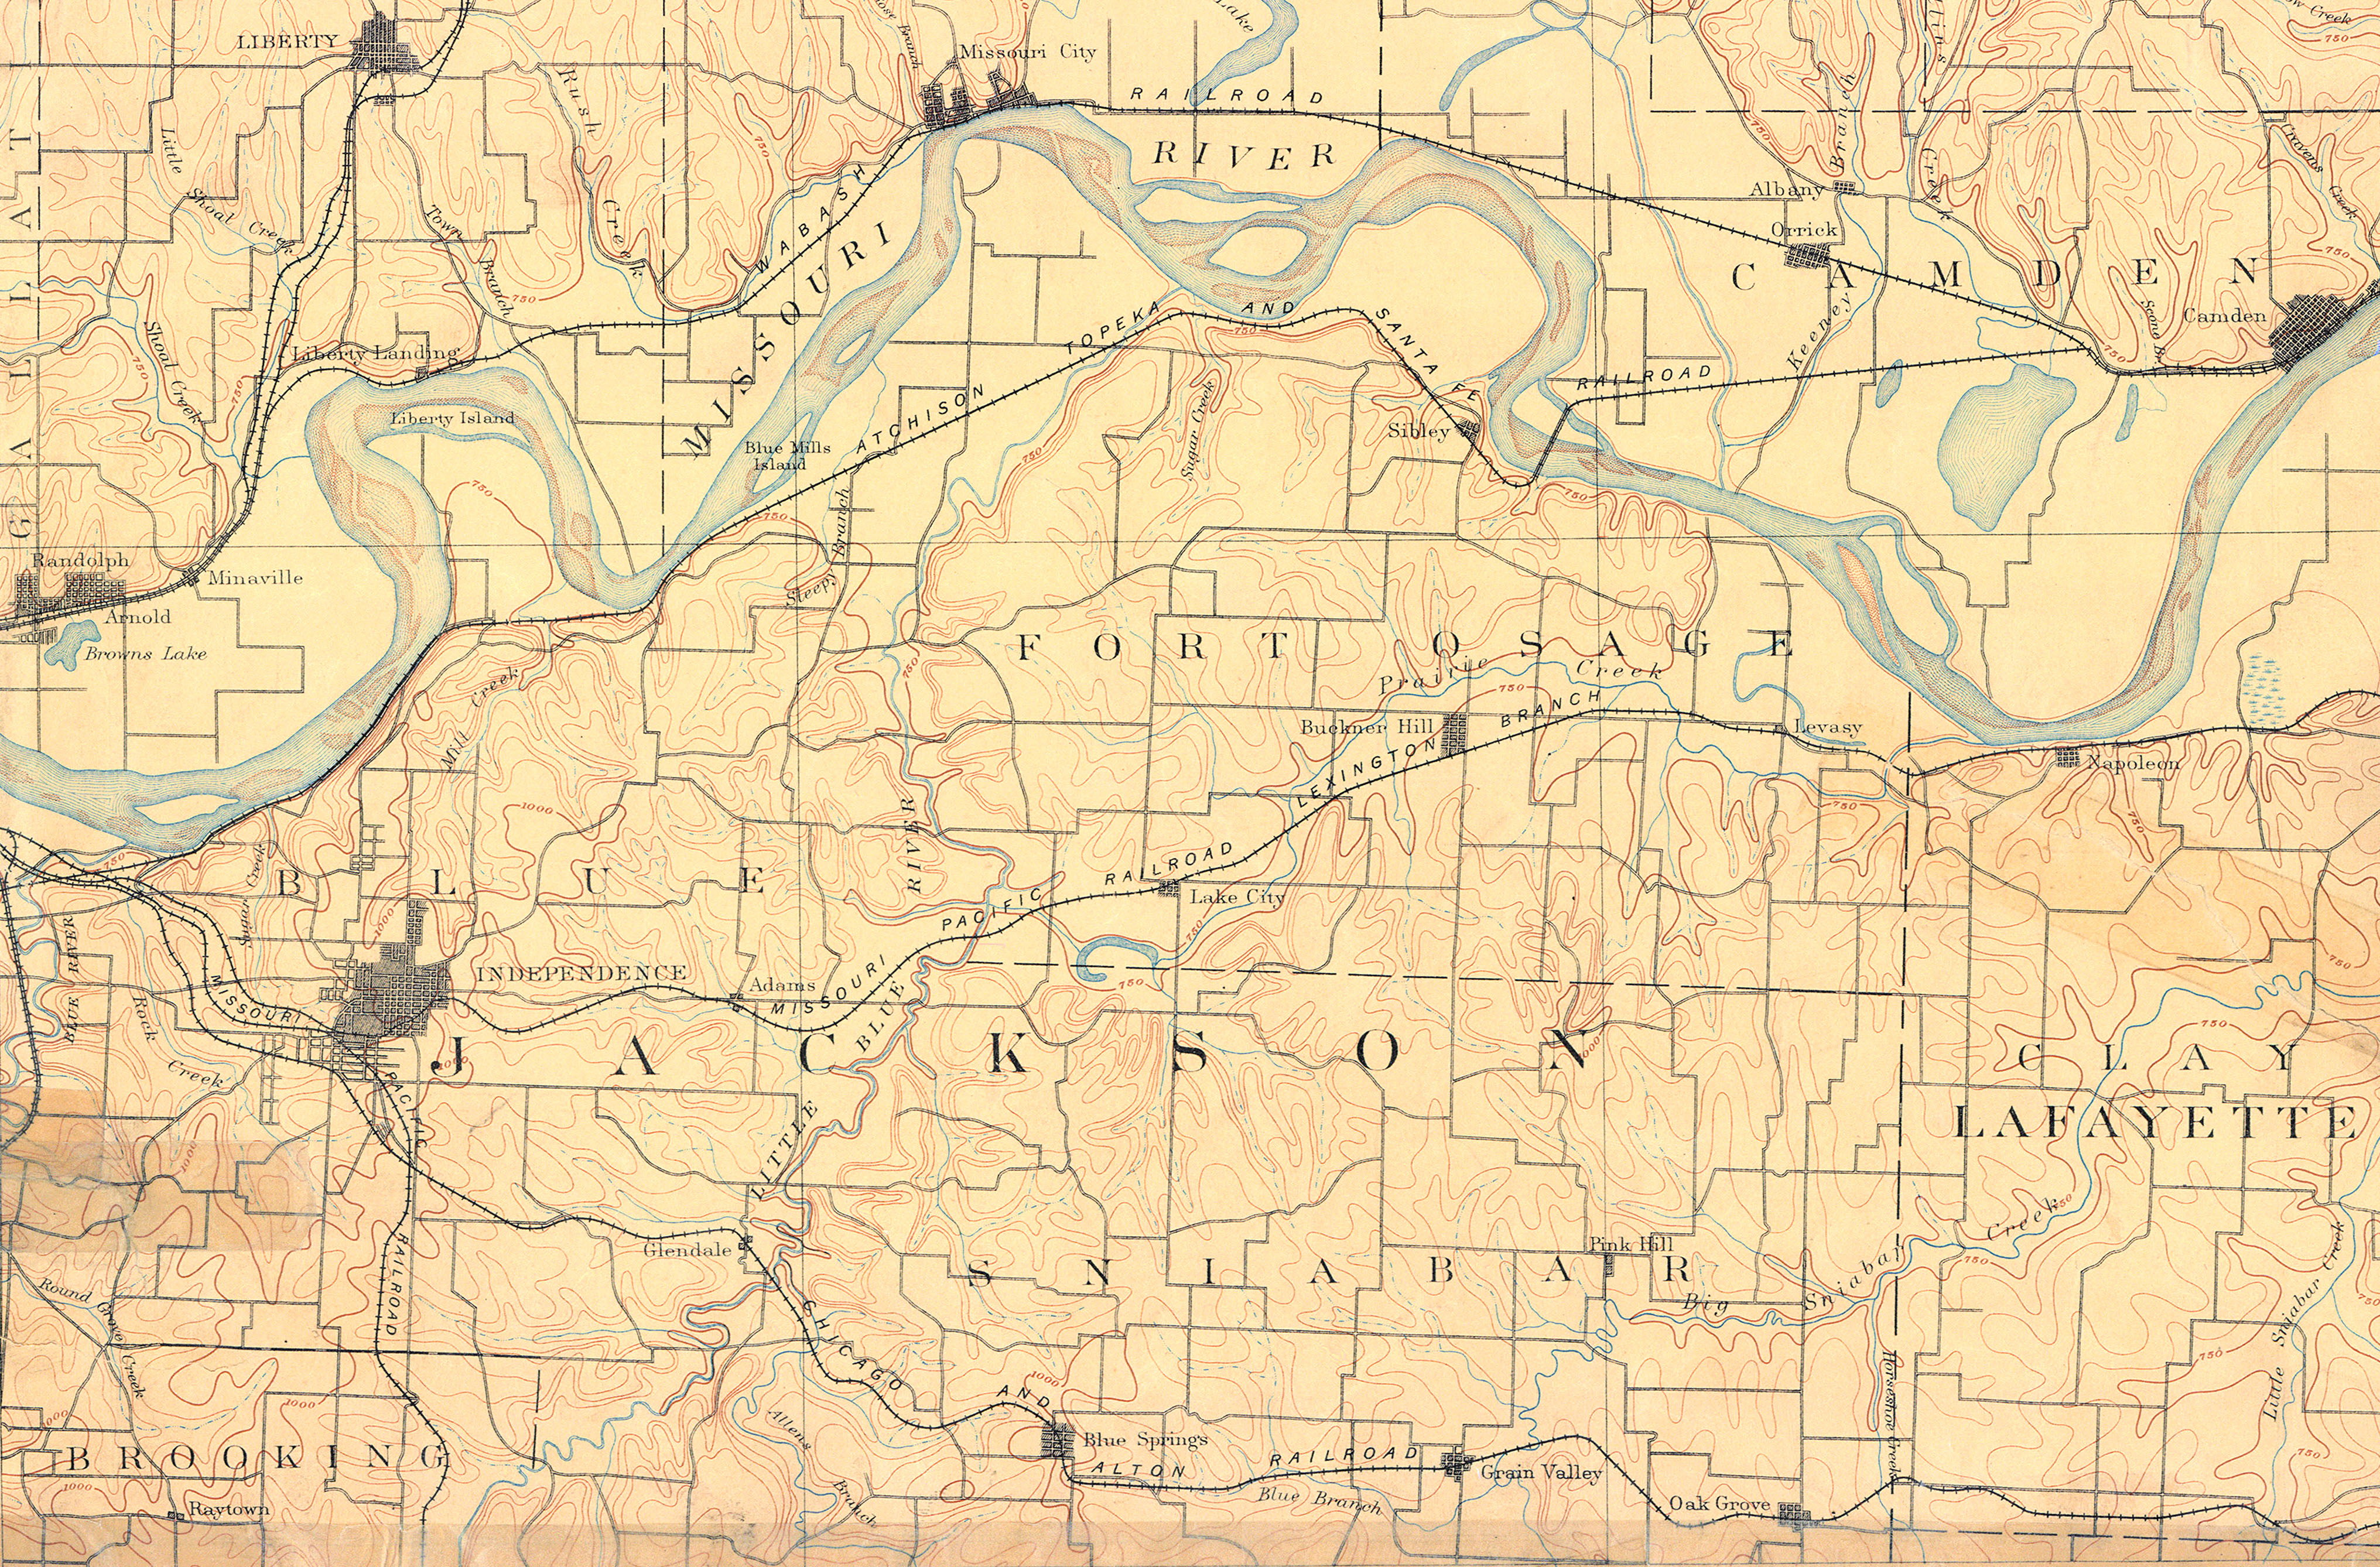 1894 map showing distance between Independence and the Missouri River.